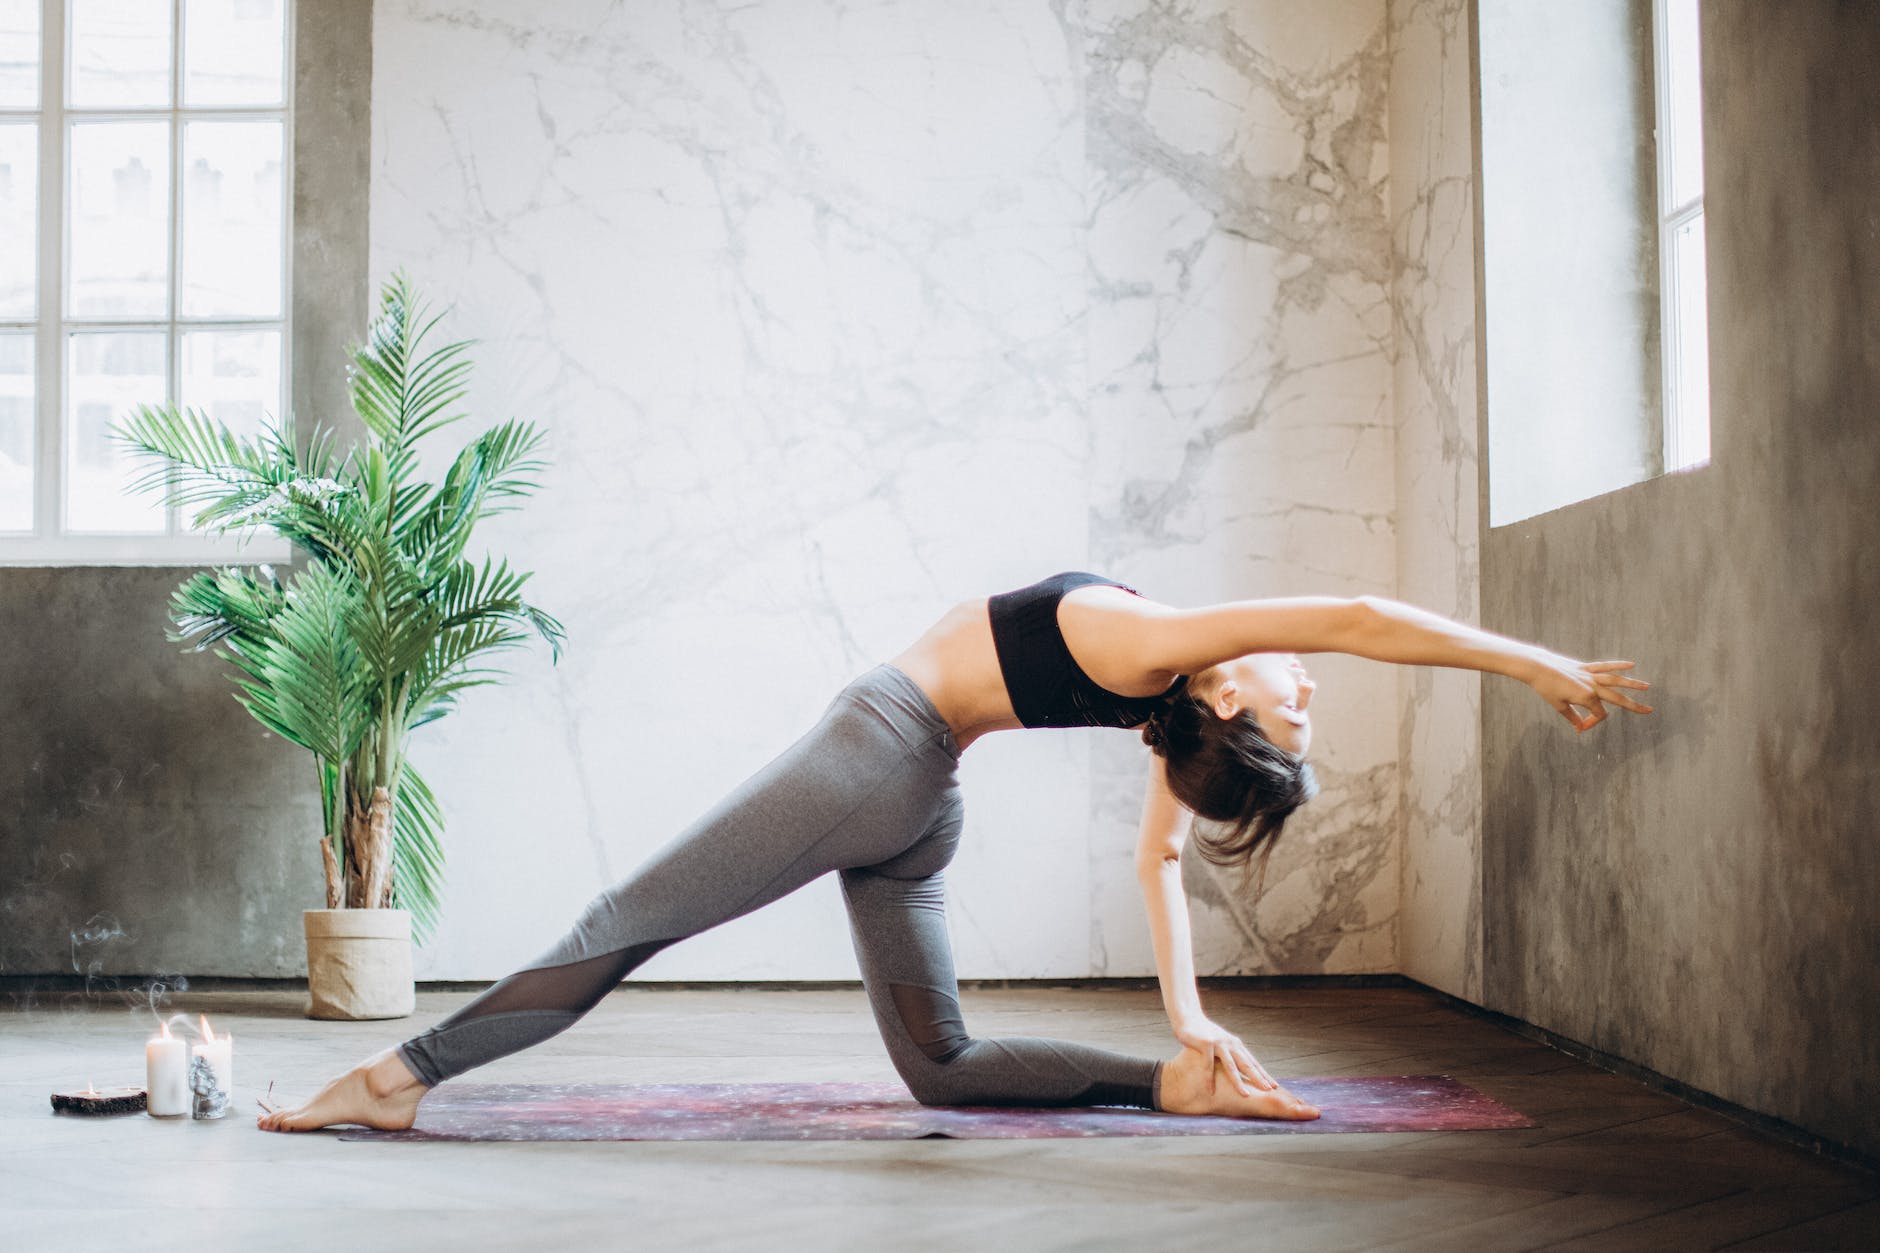 woman in gray leggings and black sports bra doing yoga on yoga mat
Photo by Elina Fairytale on Pexels.com